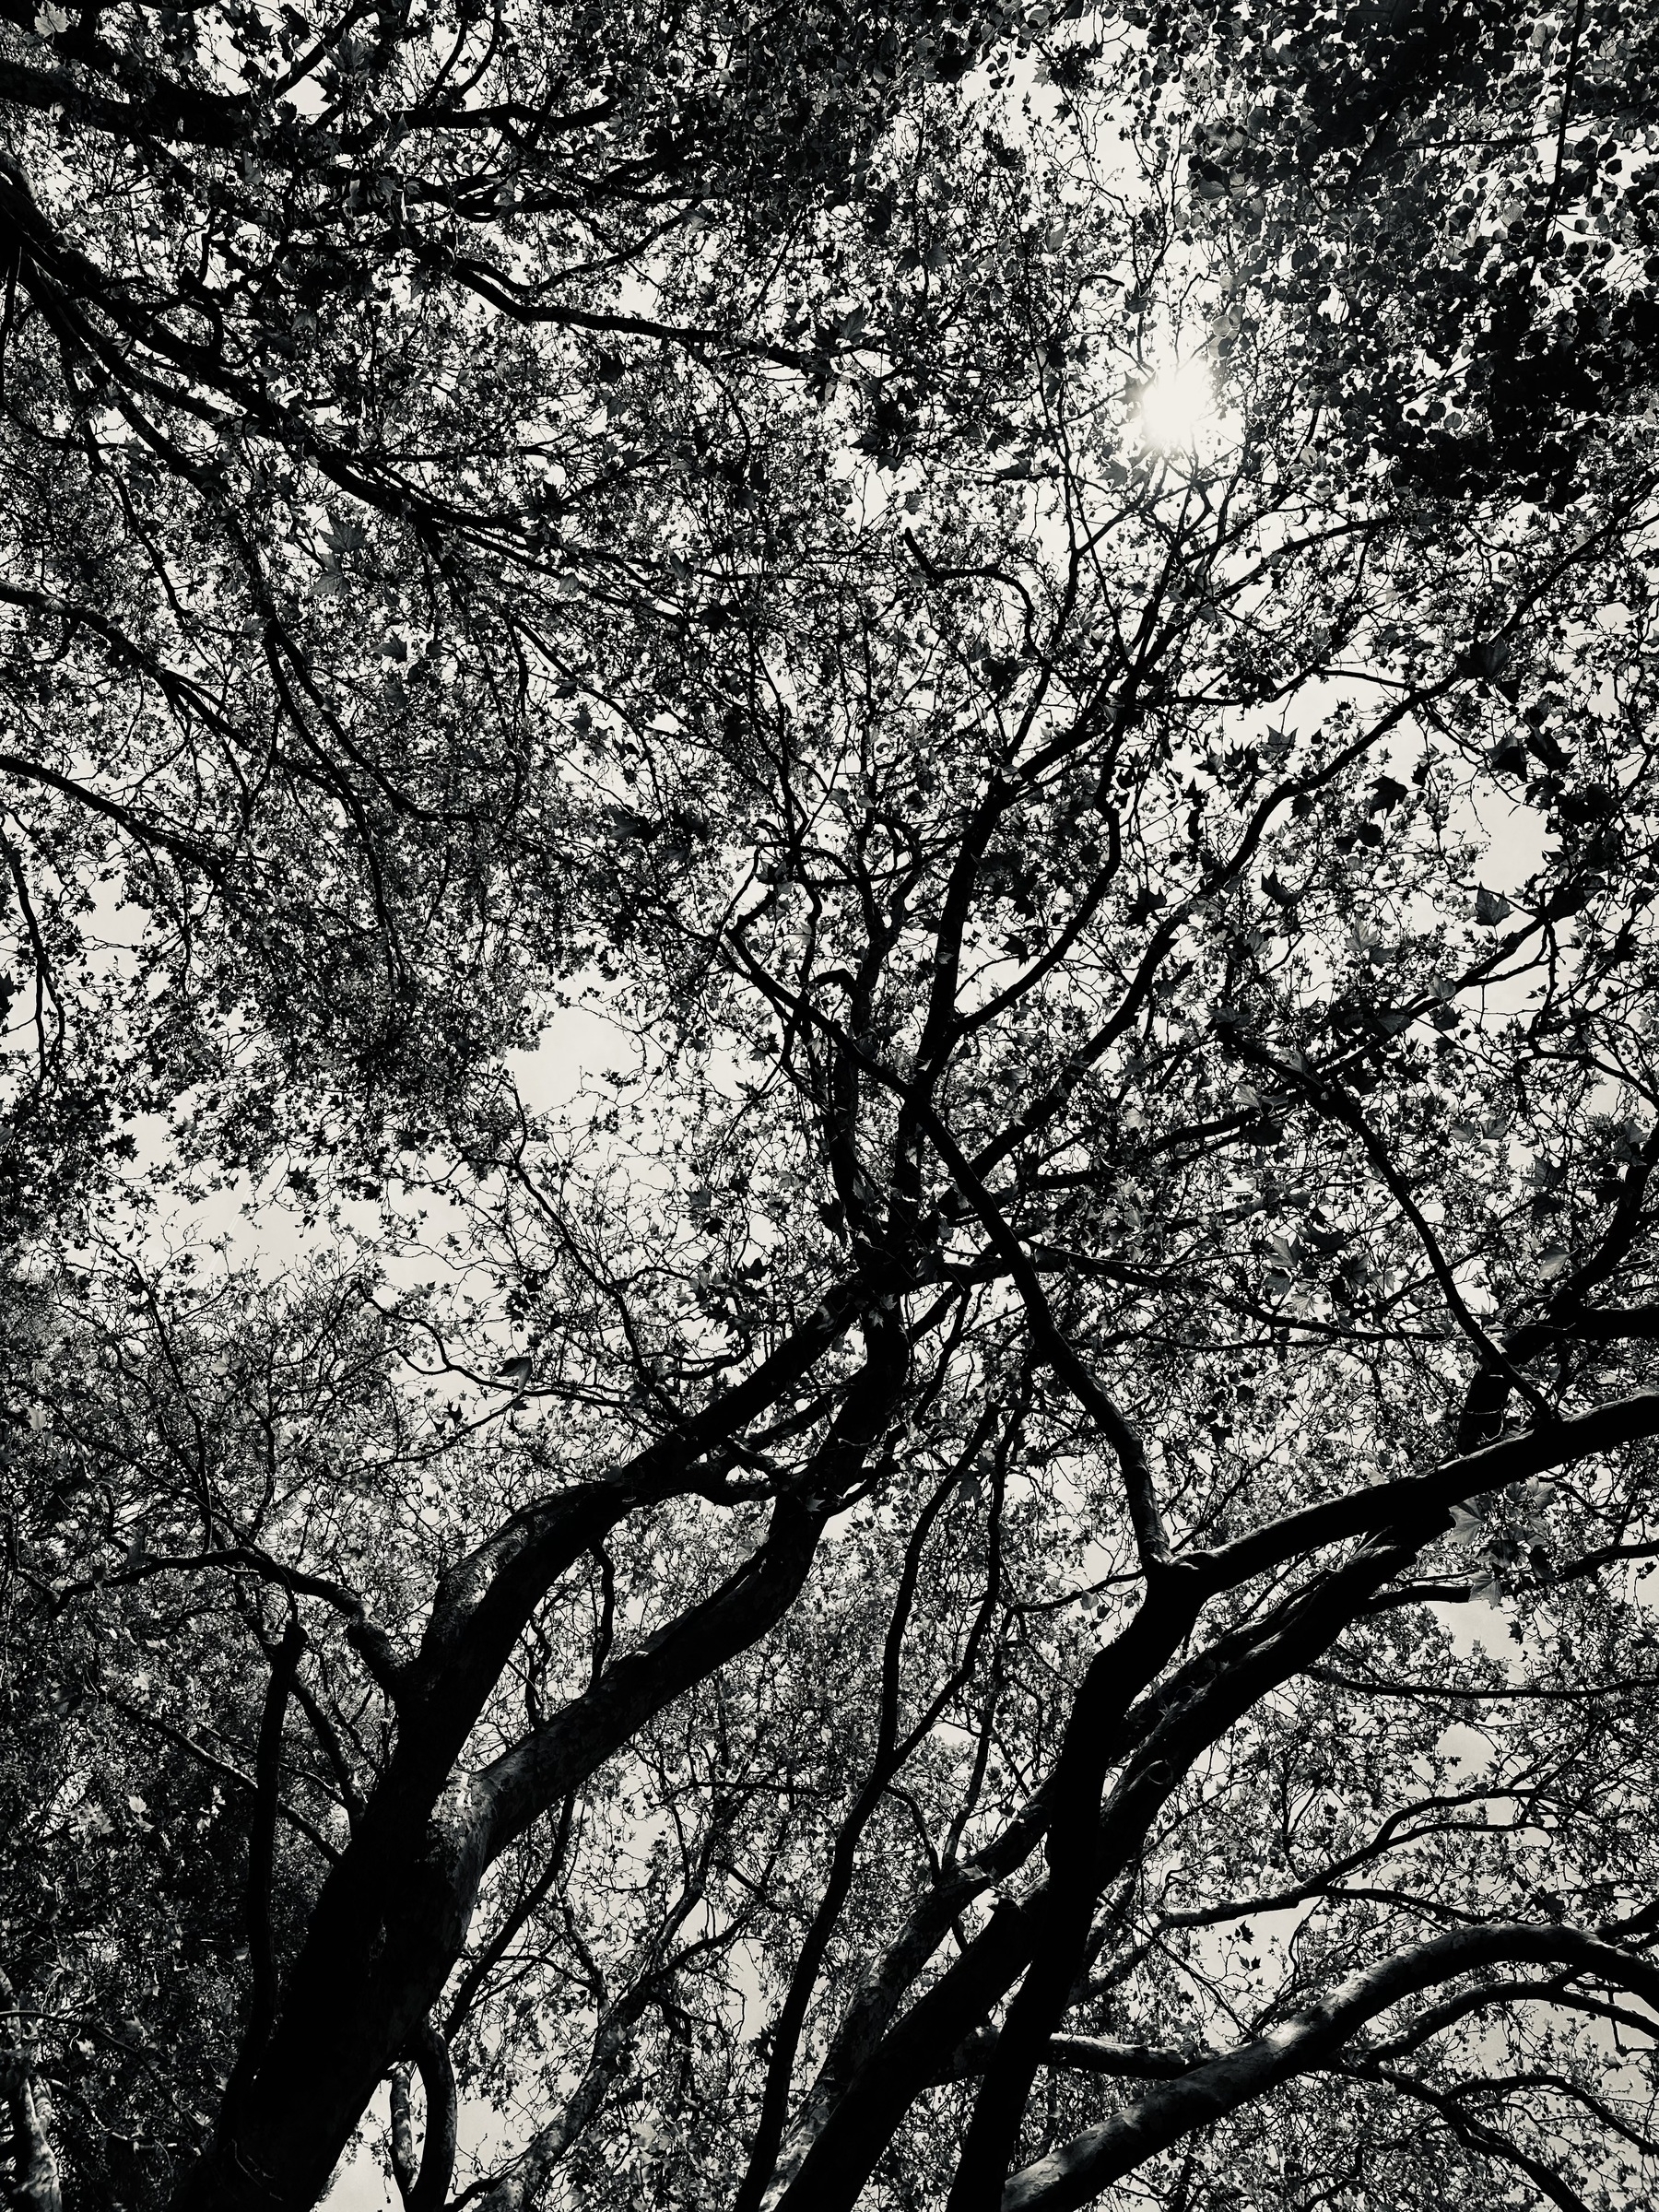 Black and white photo, looking up through tree branches at the sky and sun.